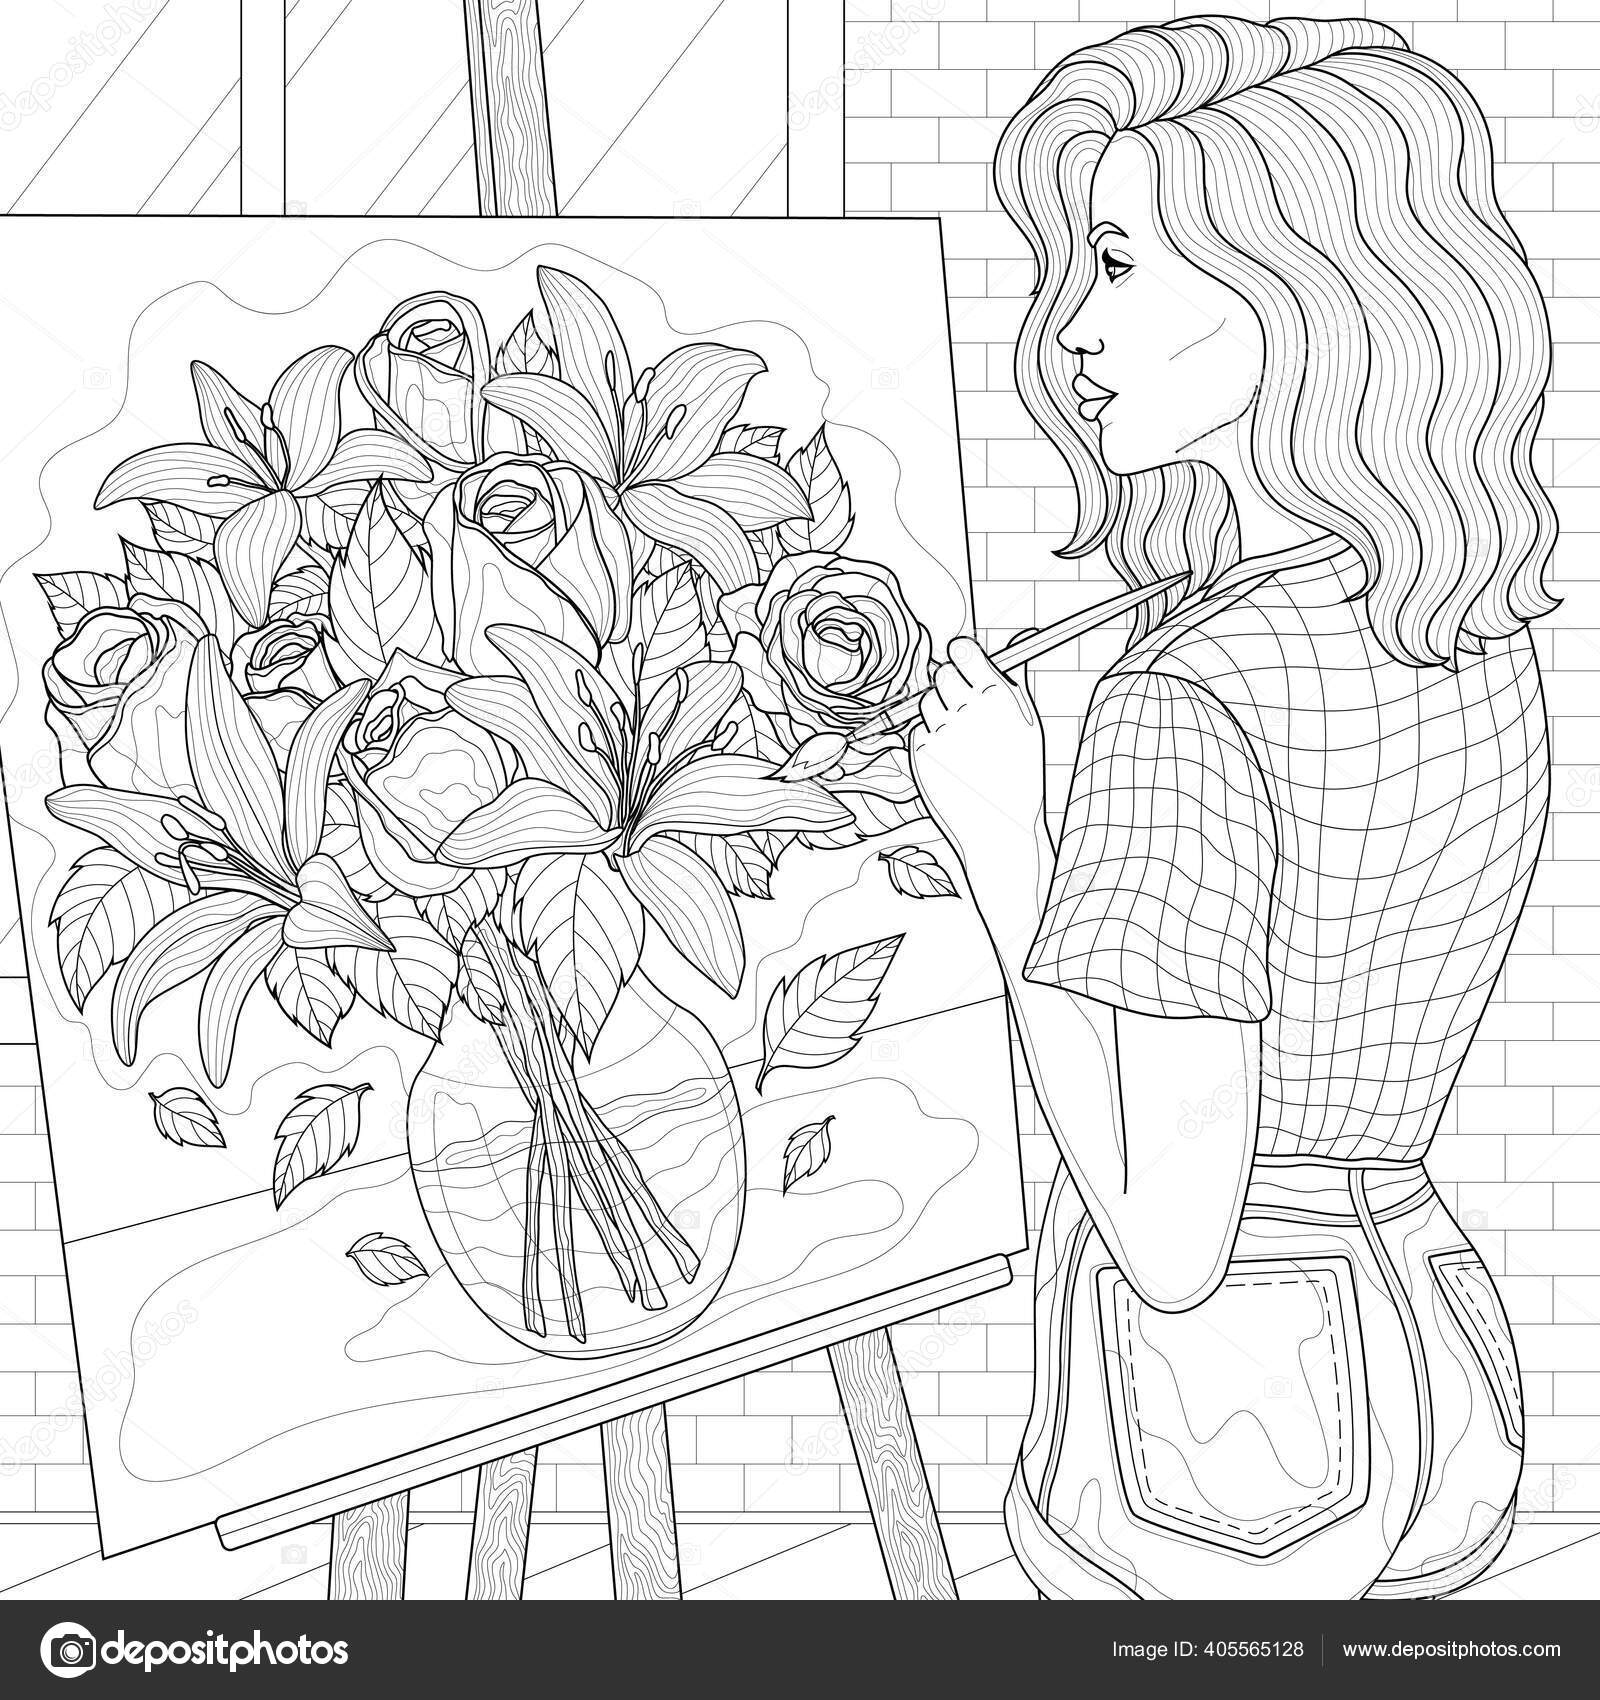 Woman flowers - Anti stress Adult Coloring Pages